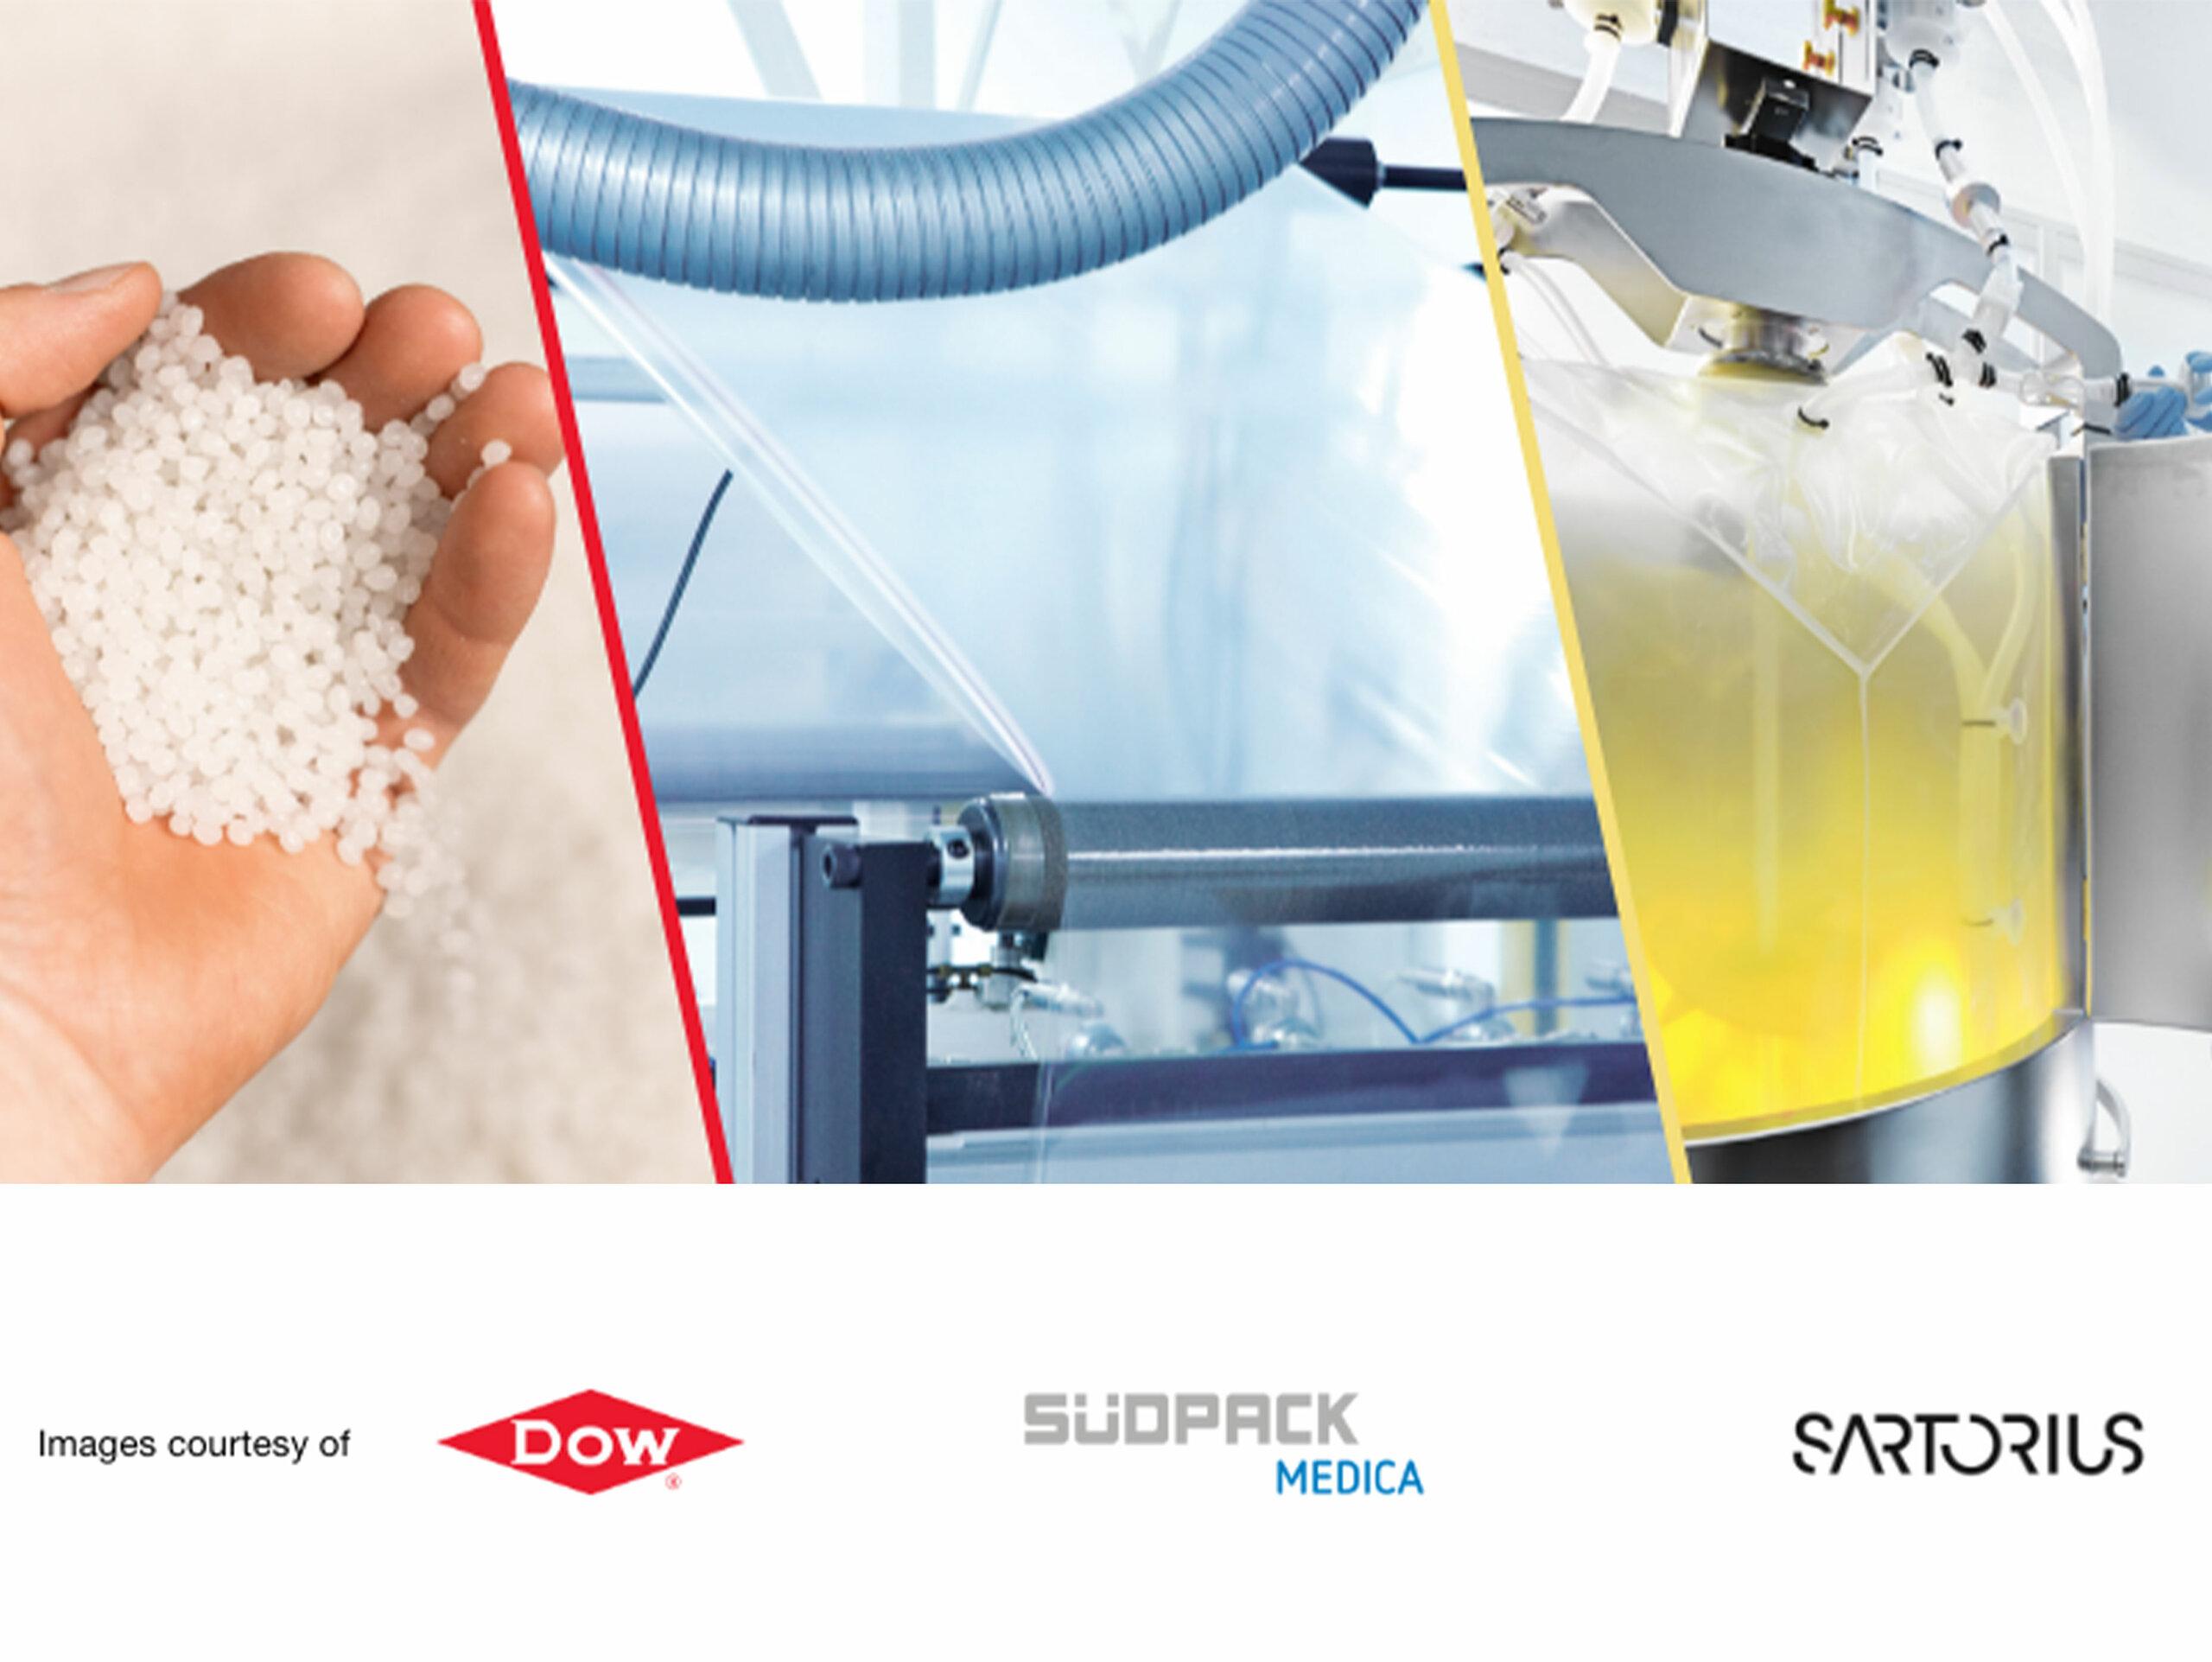 Sartorius products with Dow granules and SÜDPACK films promote safe vaccine production.